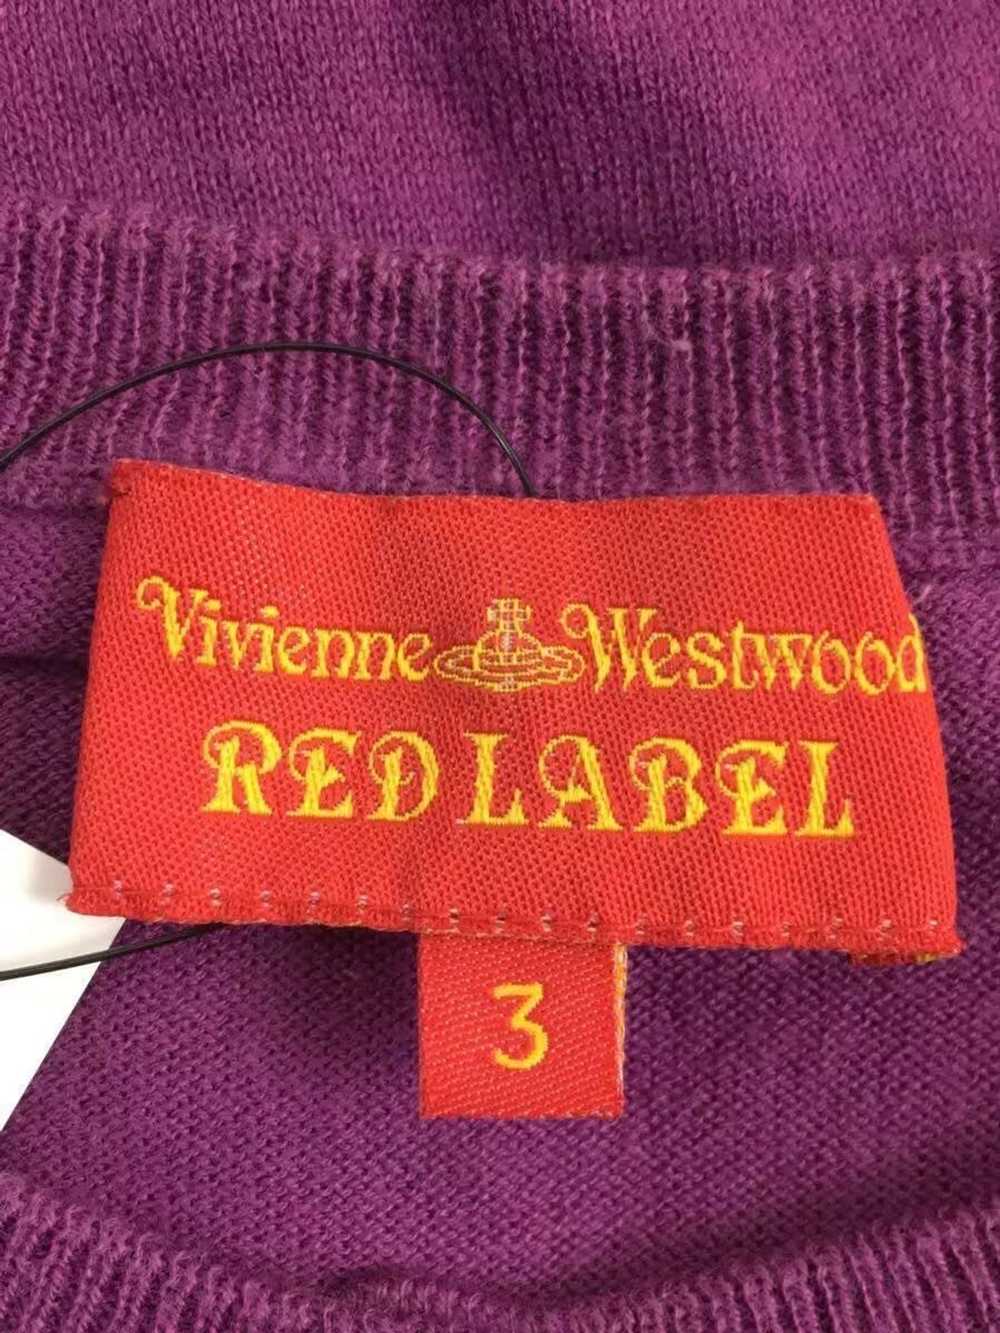 Vivienne Westwood Reconstructed Orb Knit Cardigan - image 4